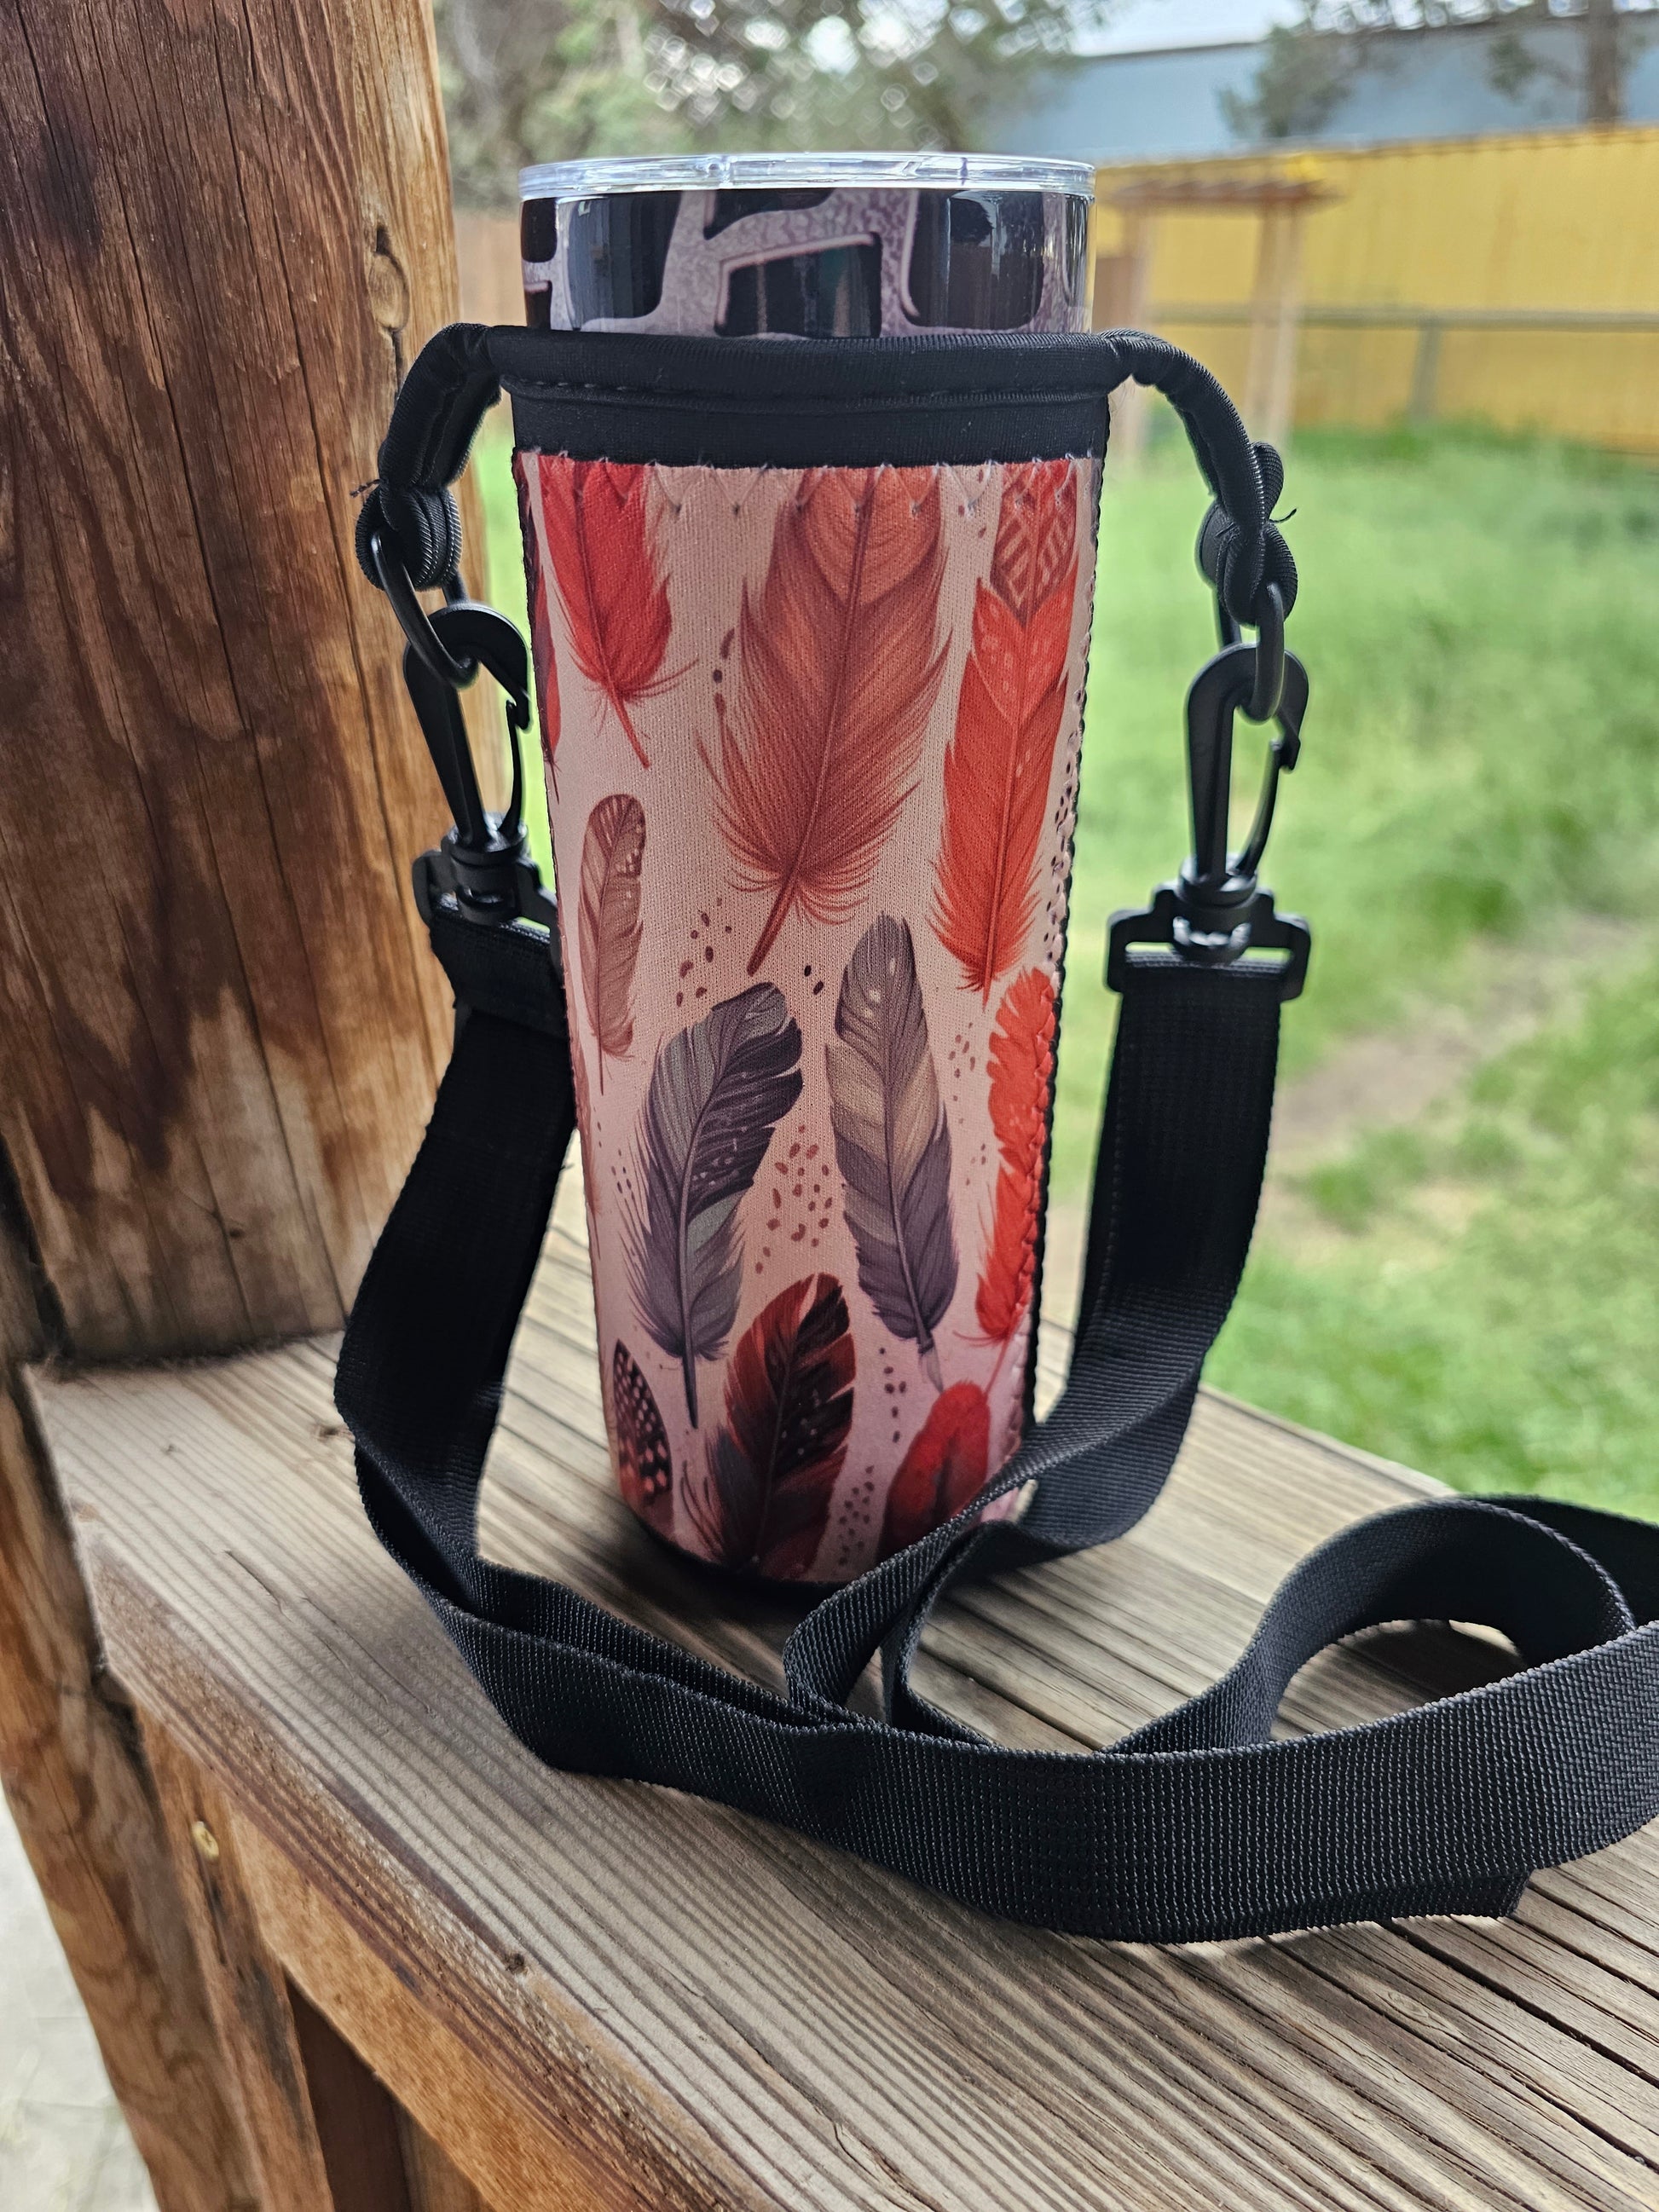 Fashion Frontier 40 oz tumbler holder with strap